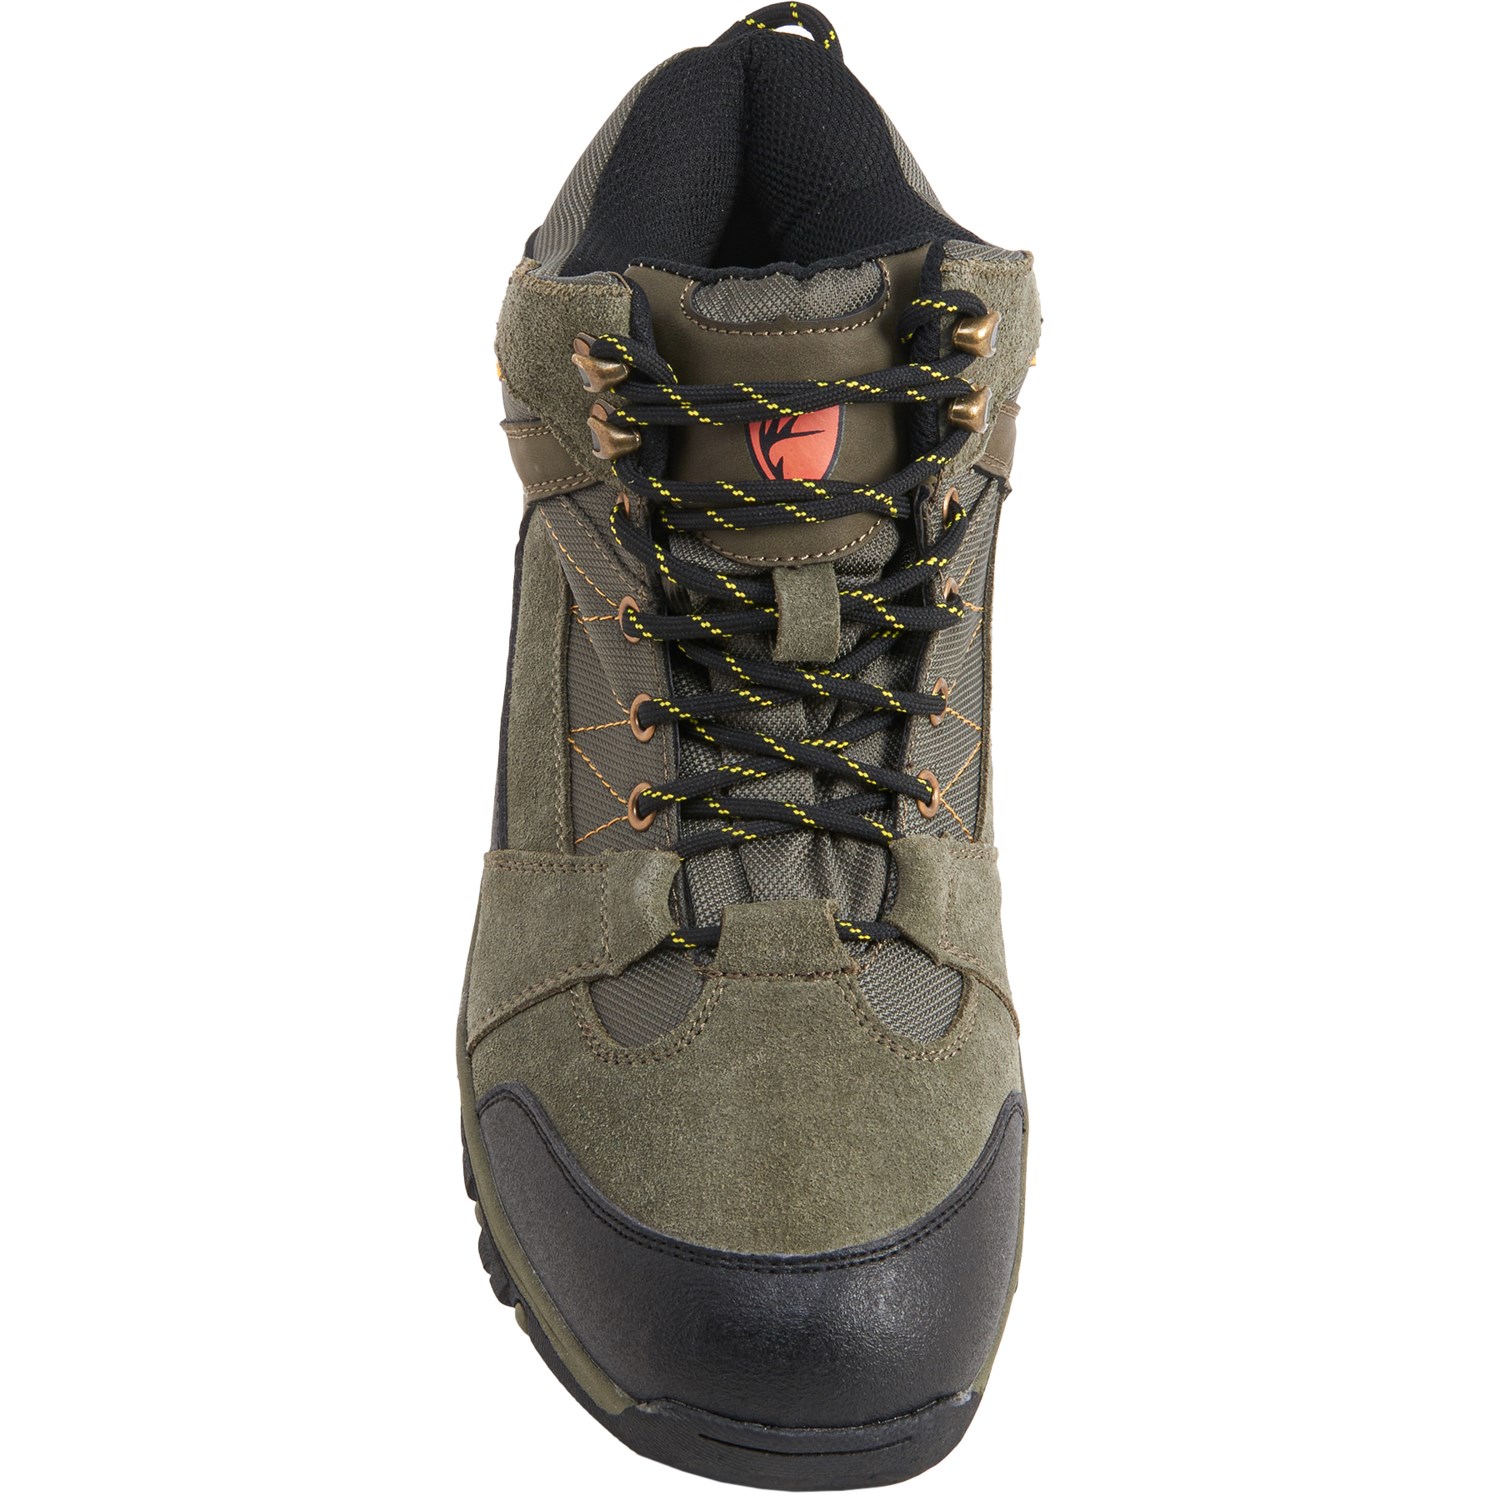 Deer Stags Anchor Hiking Boots (For Men) - Save 57%